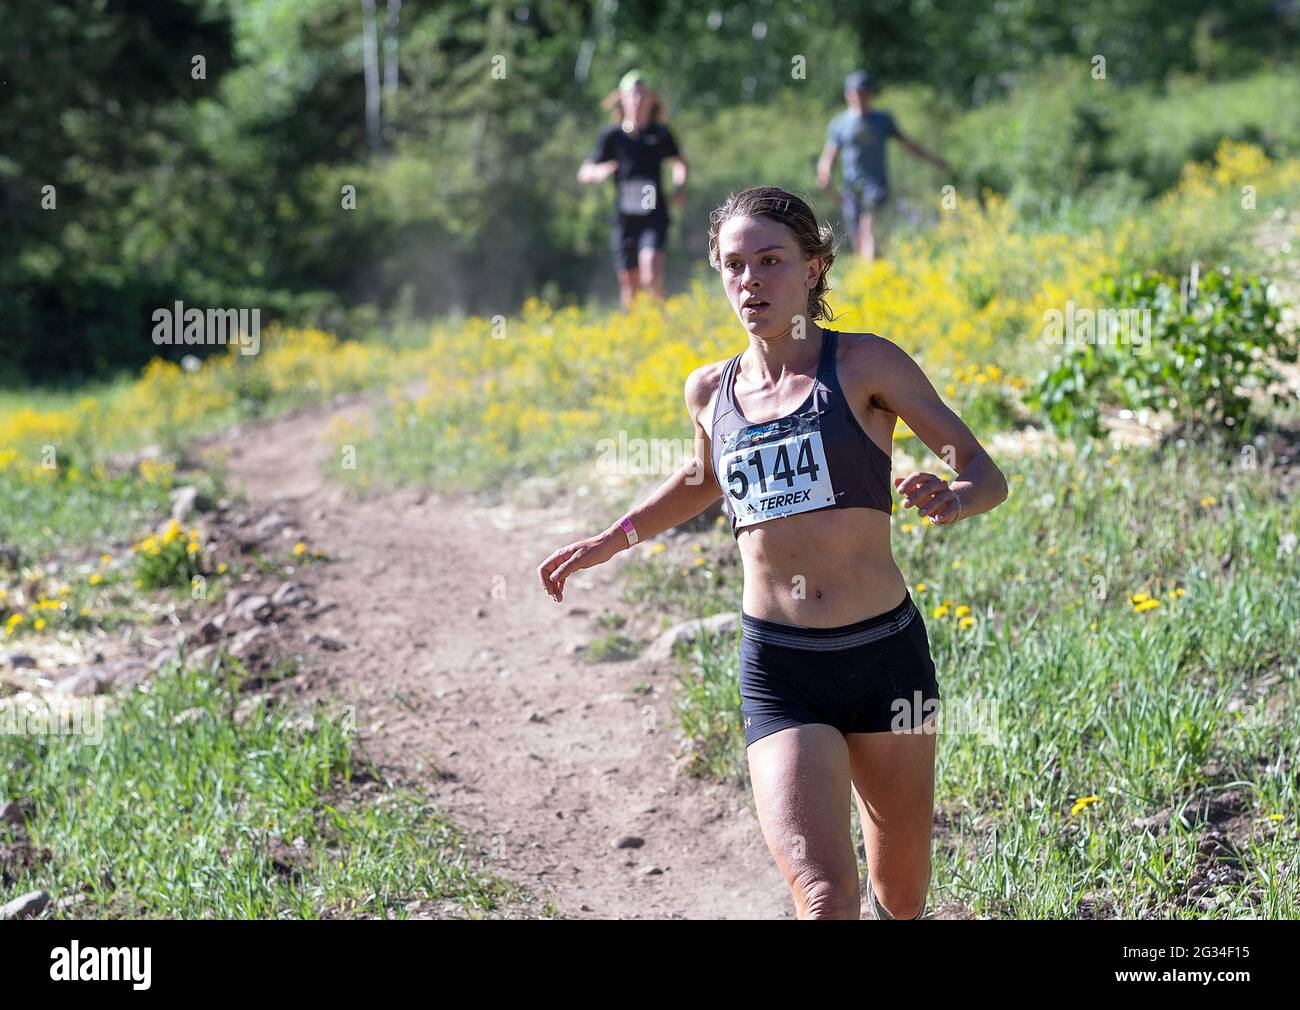 June 13, 2021: Thorton, Colorado runner, Janelle Lincks, emerges from the forest on her way to winning the Women's 2021 Addias Terrex 10K Spring Runoff at the GoPro Mountain Games, Vail, Colorado. Stock Photo